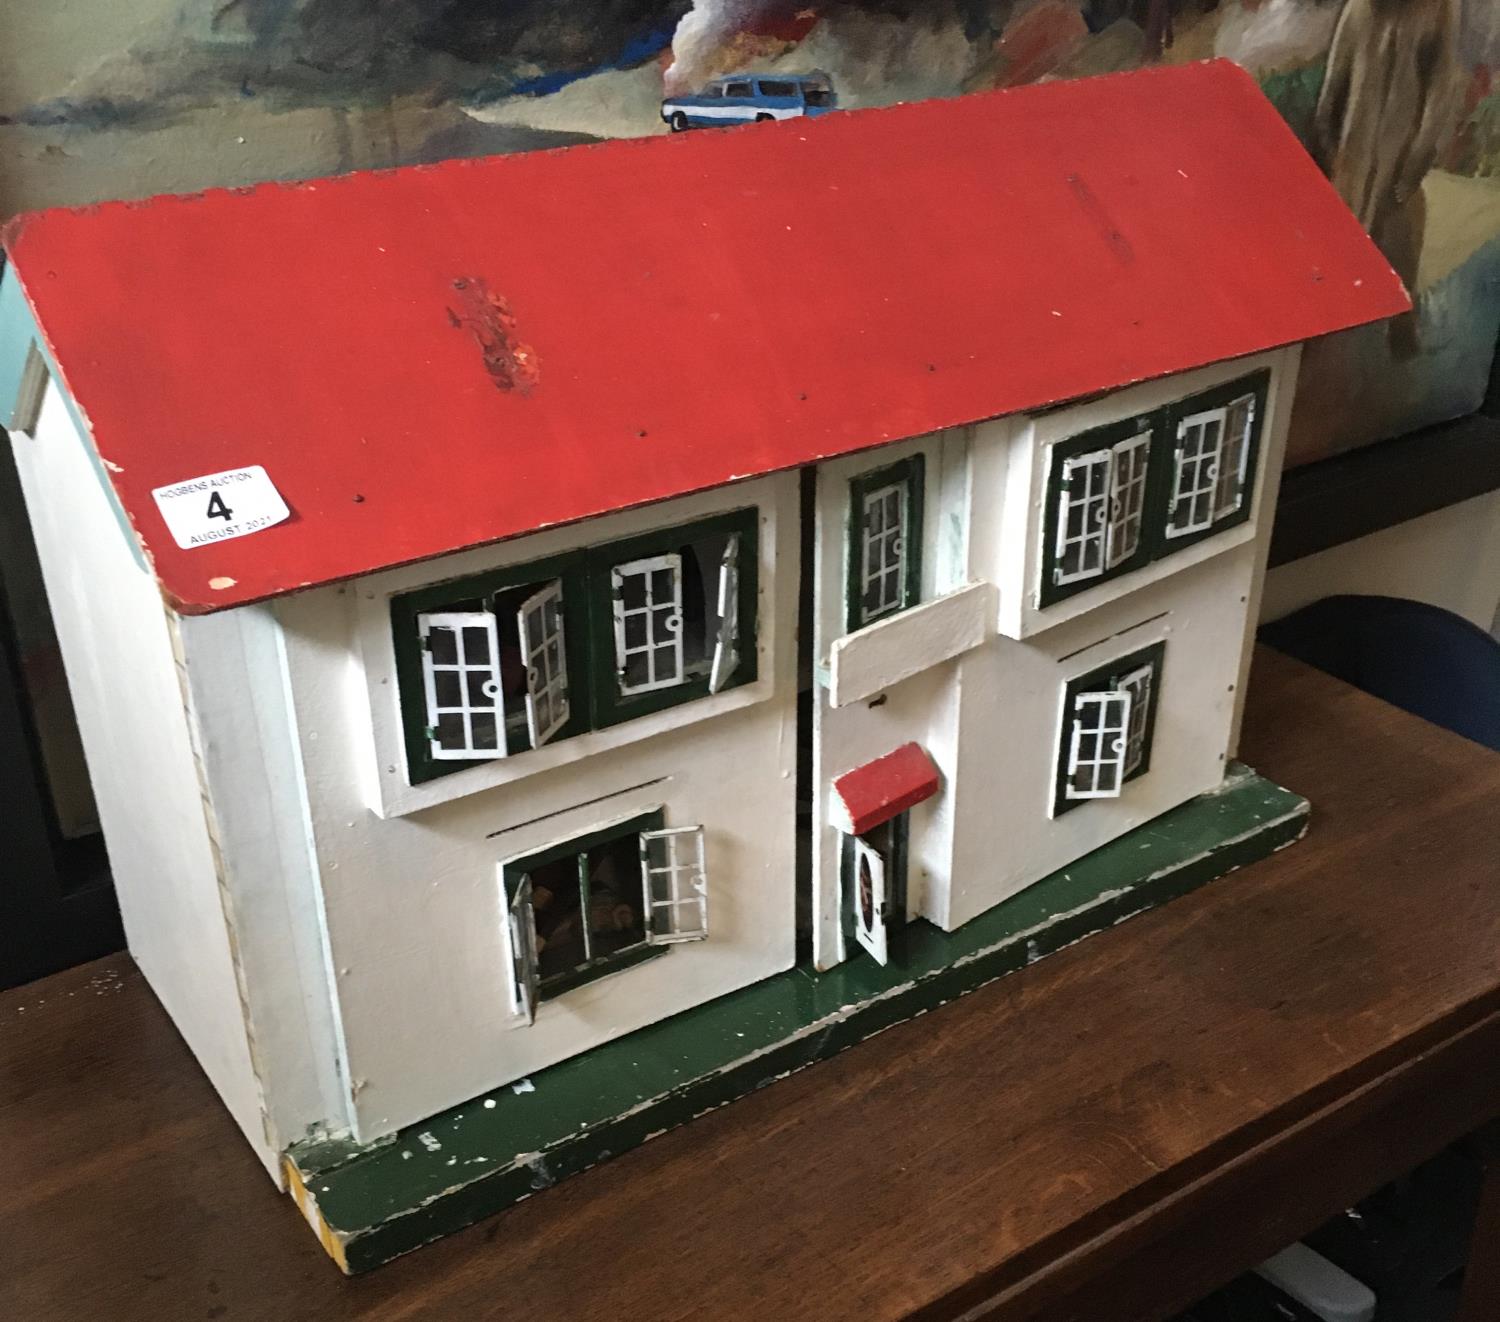 Vintage Dolls House with contents